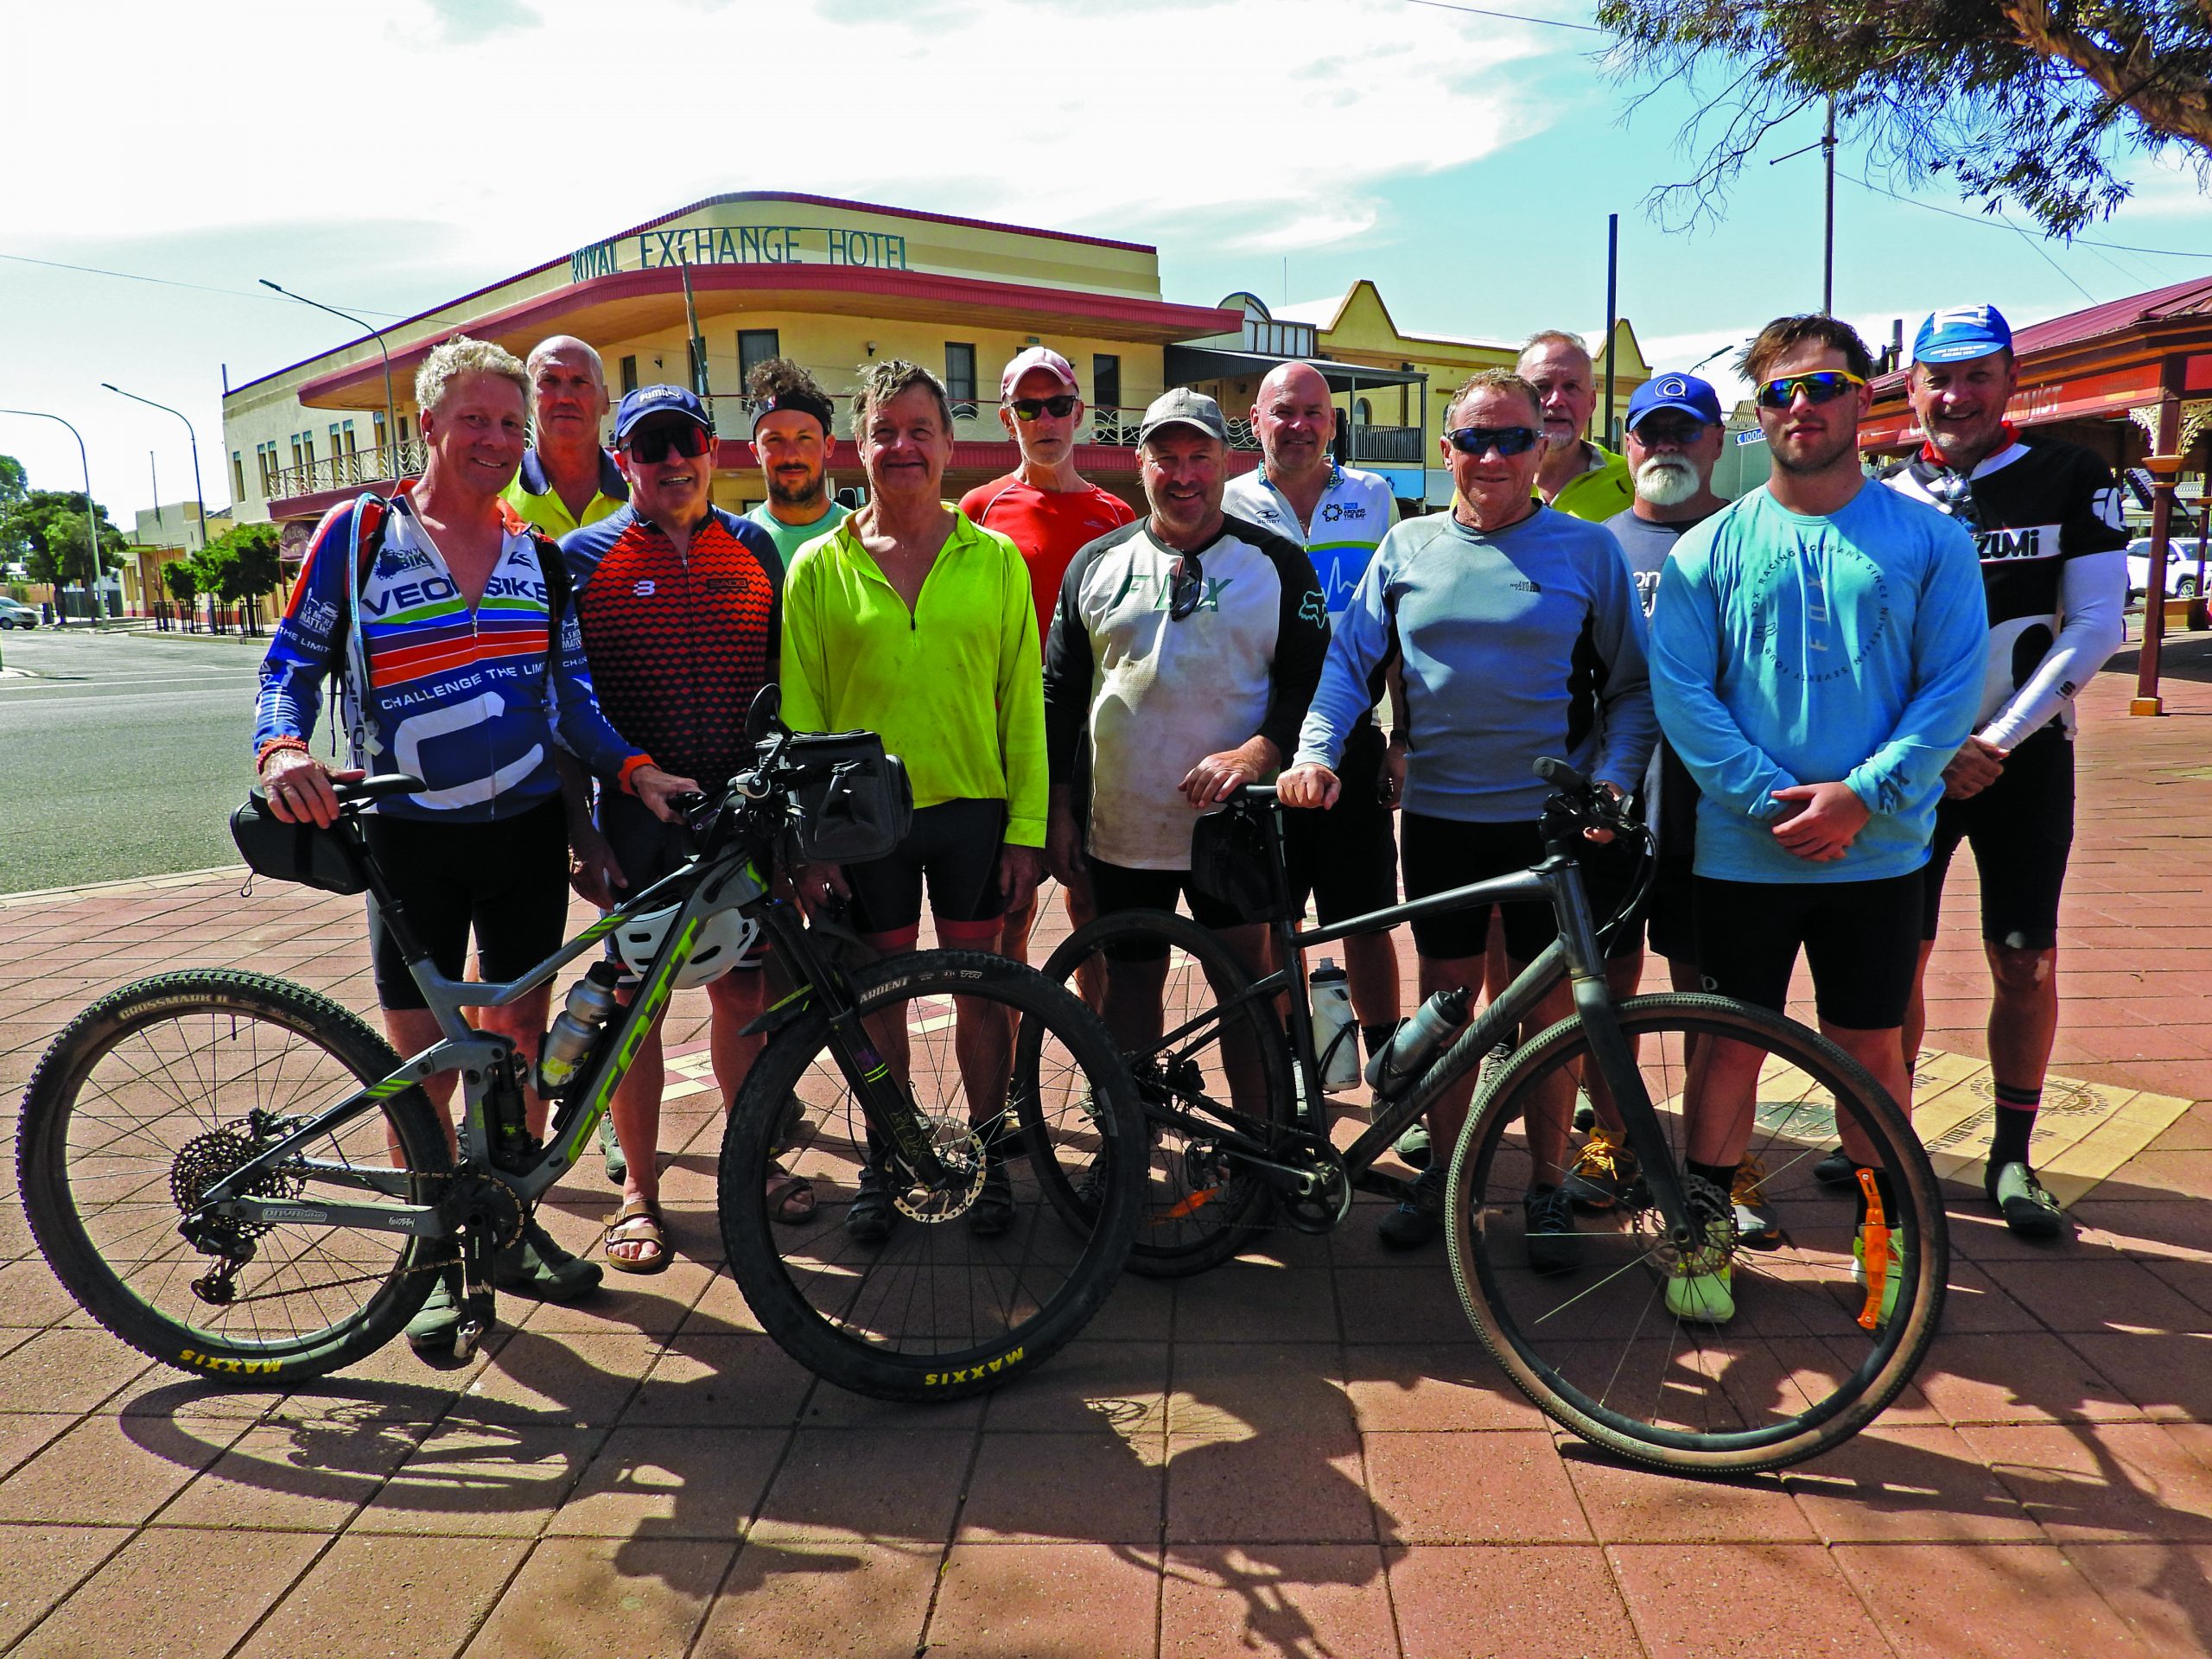 The group of cyclists at the town square last Friday. PICTURE: Andrew Lodiong